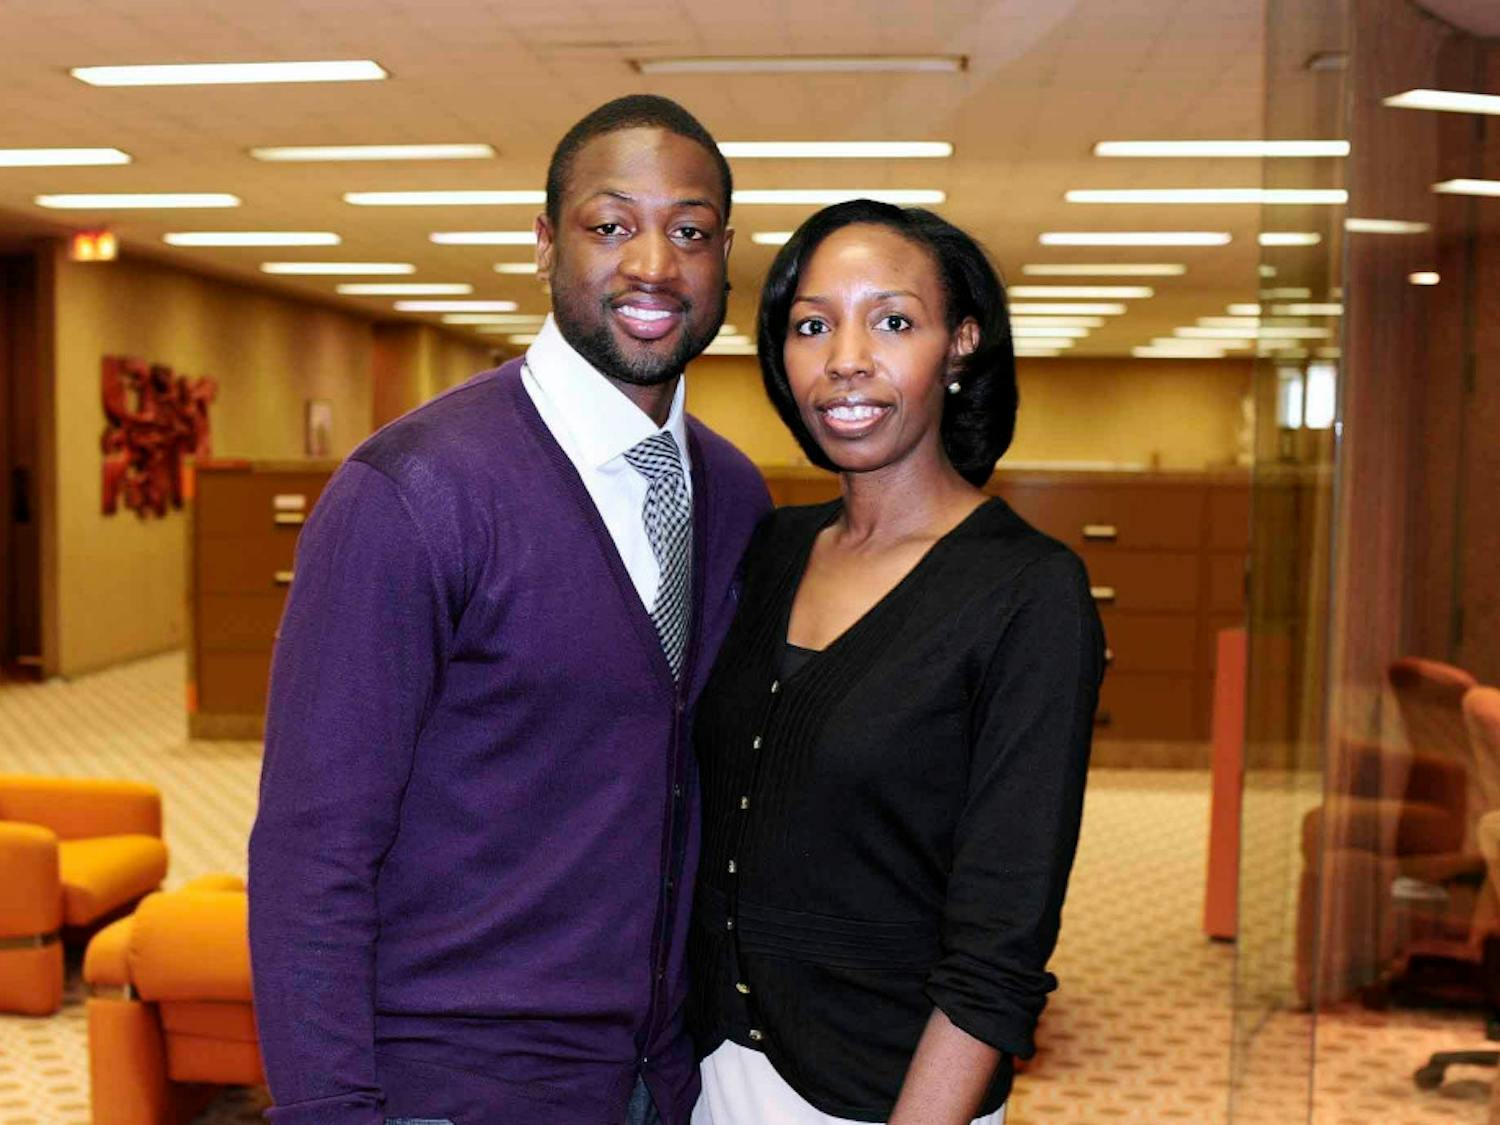 Dwayne Wade is one of the many celebrities Mira Lowe interviewed during her time at JET magazine.